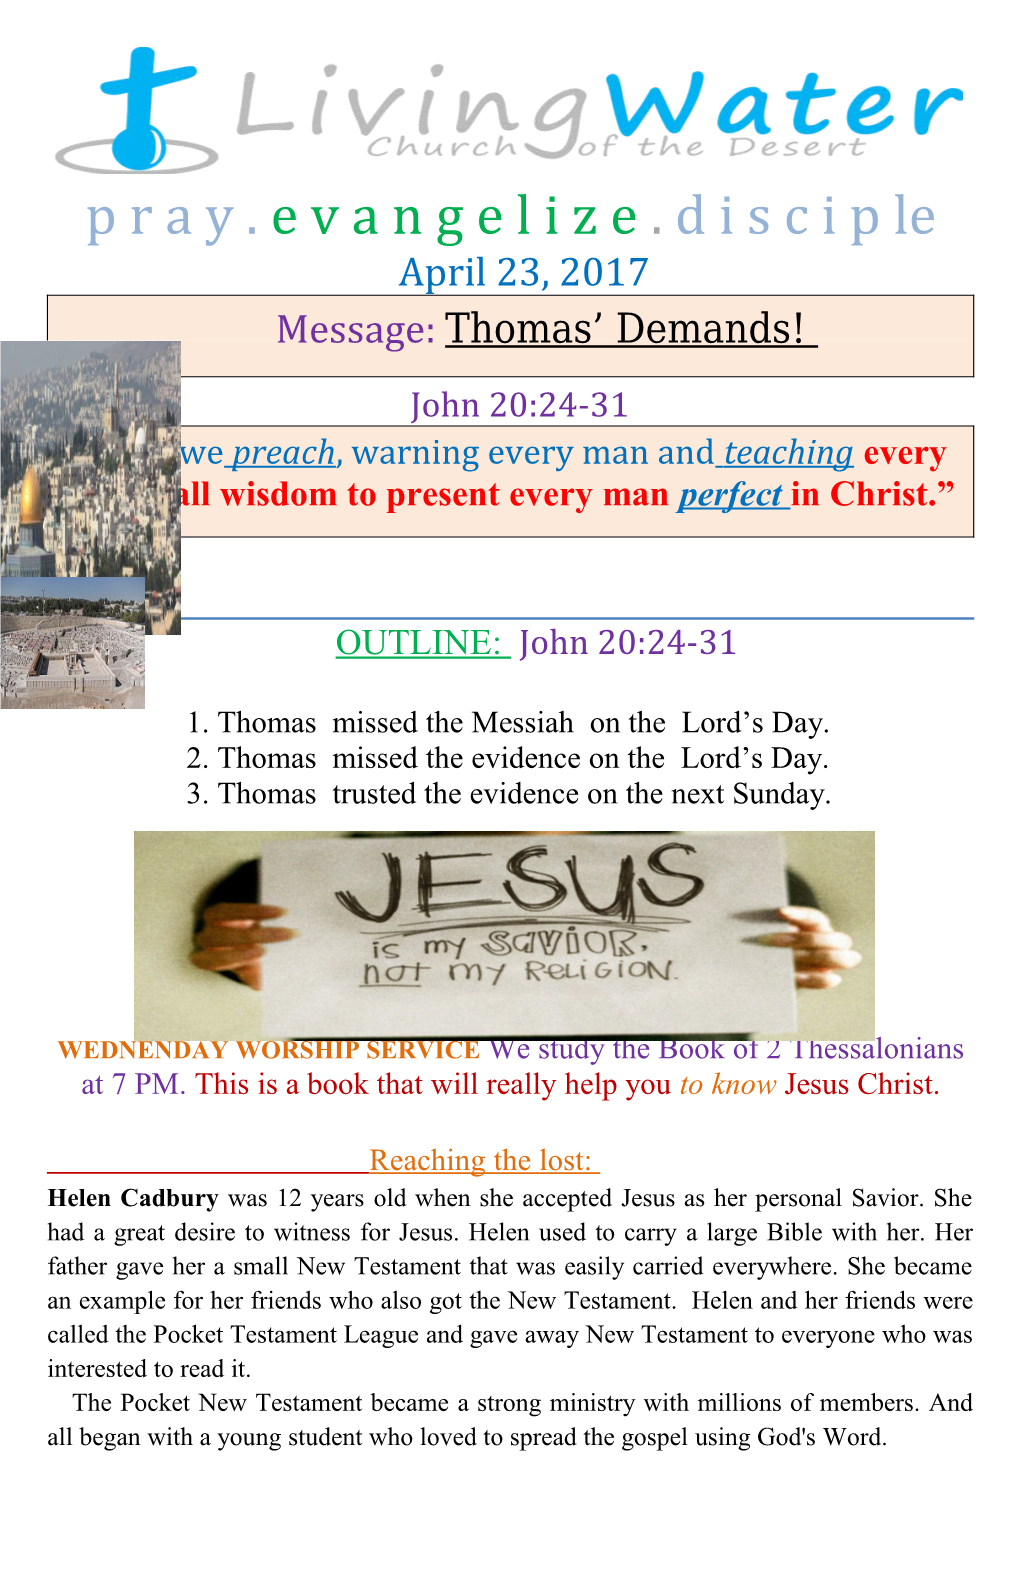 1. Thomas Missed the Messiah on the Lord S Day